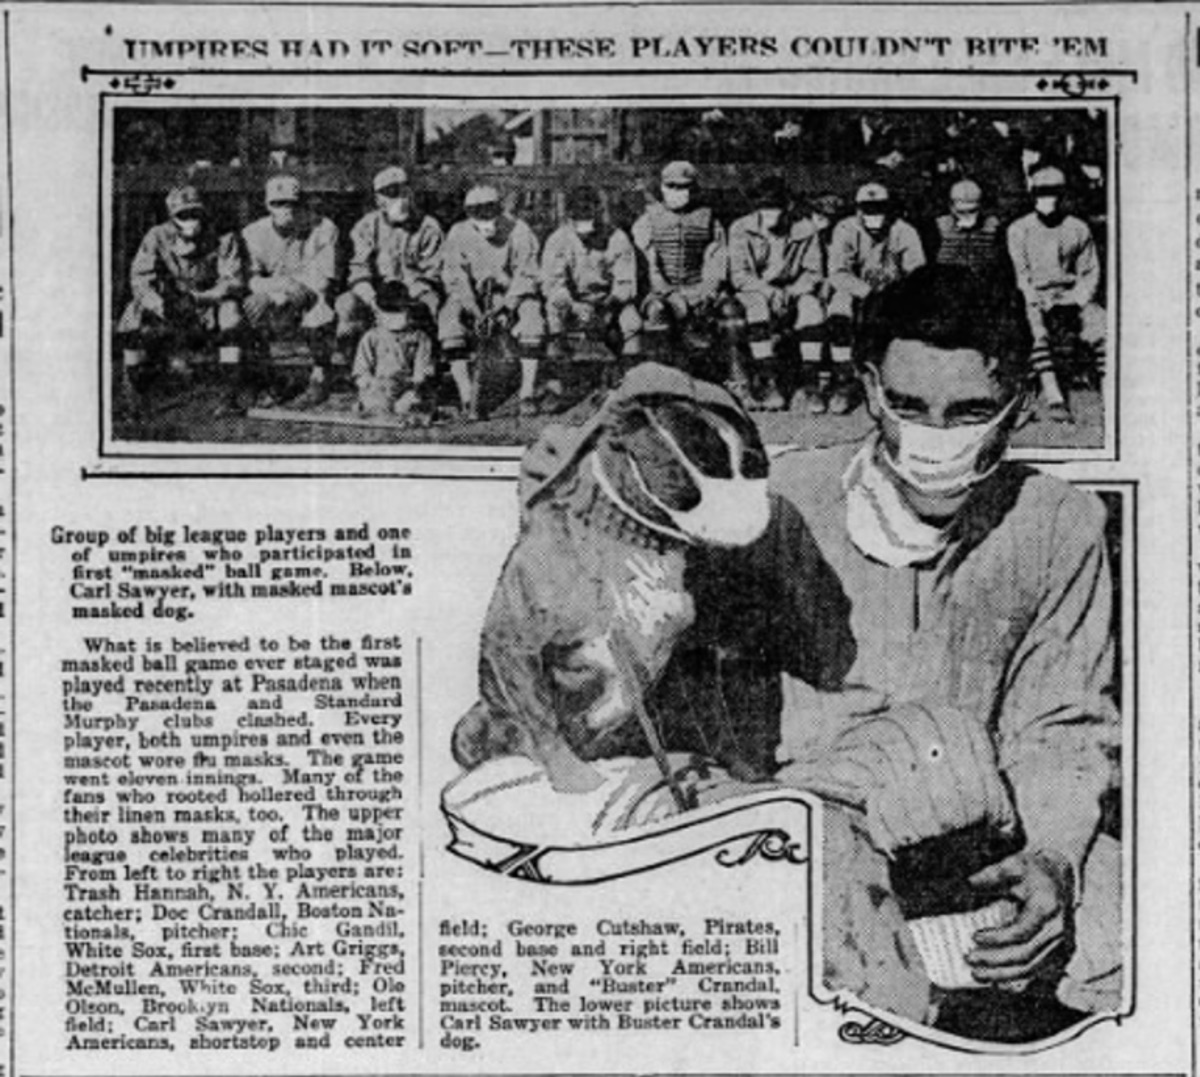 Chick Gandil and Fred McMullin were in the infamous “flu mask” game in Pasadena in January 1919. See:  https://www.si.com/mlb/2020/03/09/coronavirus-baseball-history. If only we could know what they thought about life under quarantine. Both players were educated and intelligent, with young families in California.